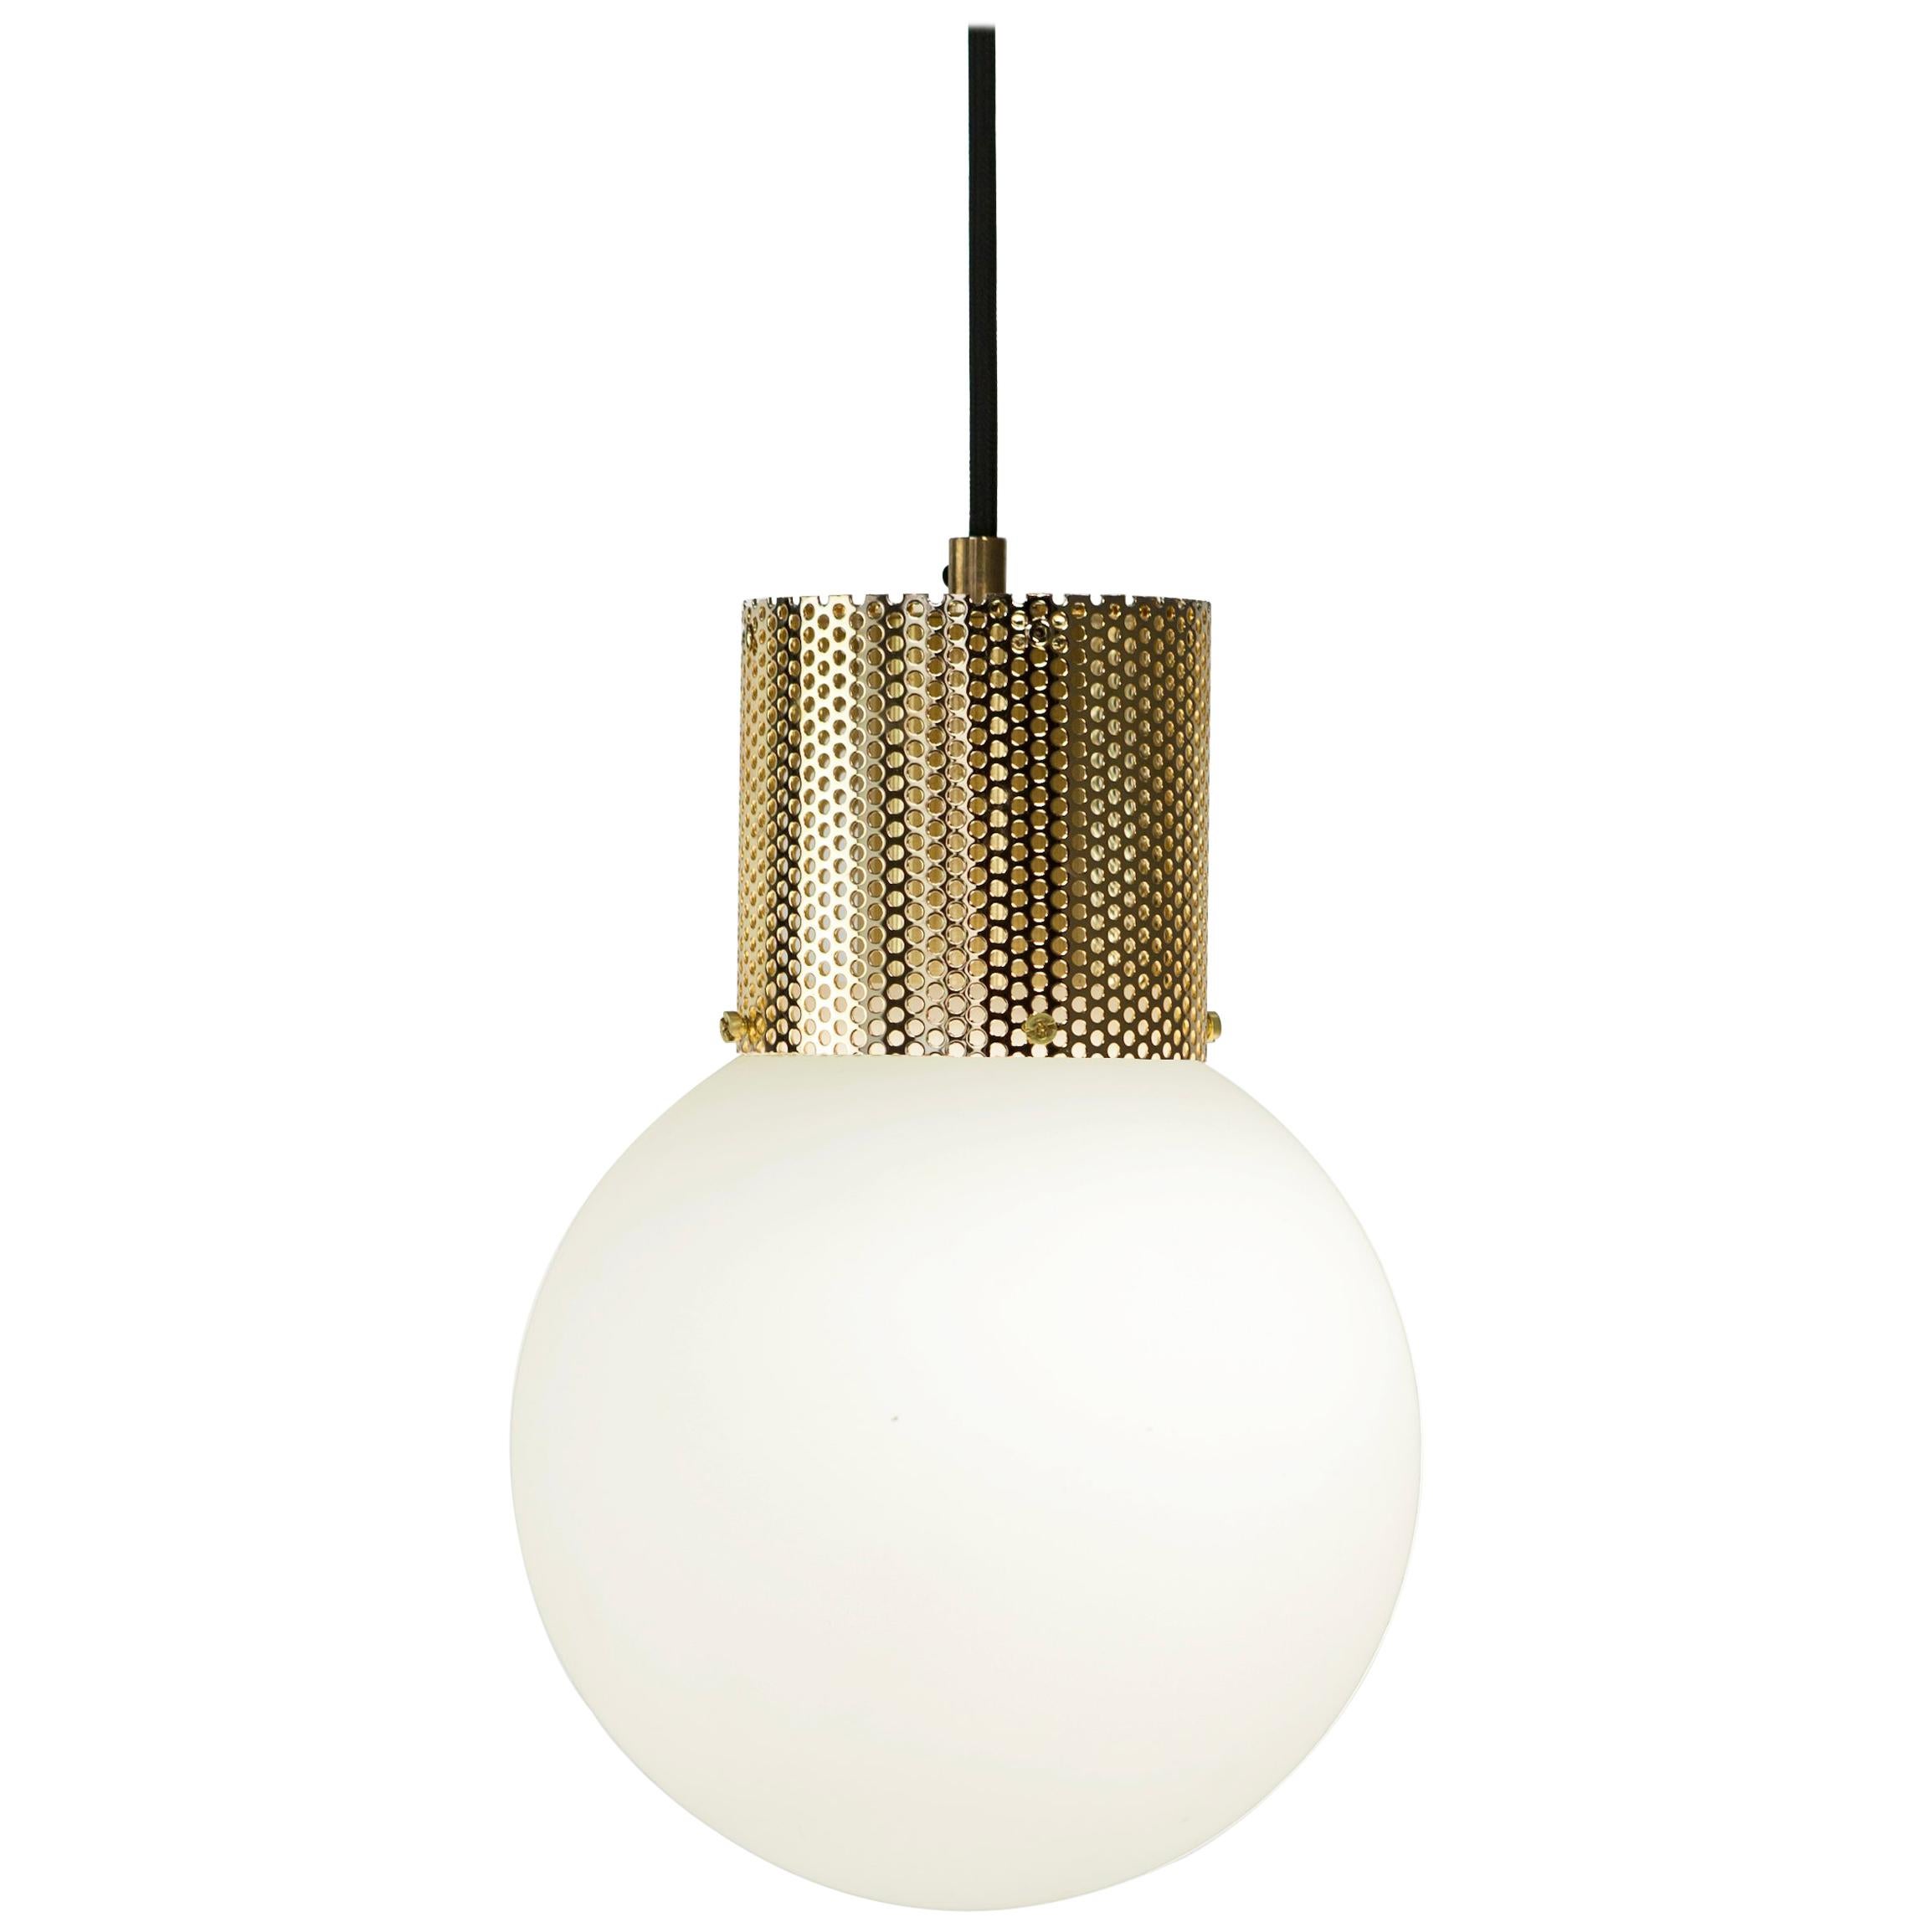 Perf Pendant Light Medium Brass Perforated Tube, Glass Round Orb Shade For Sale